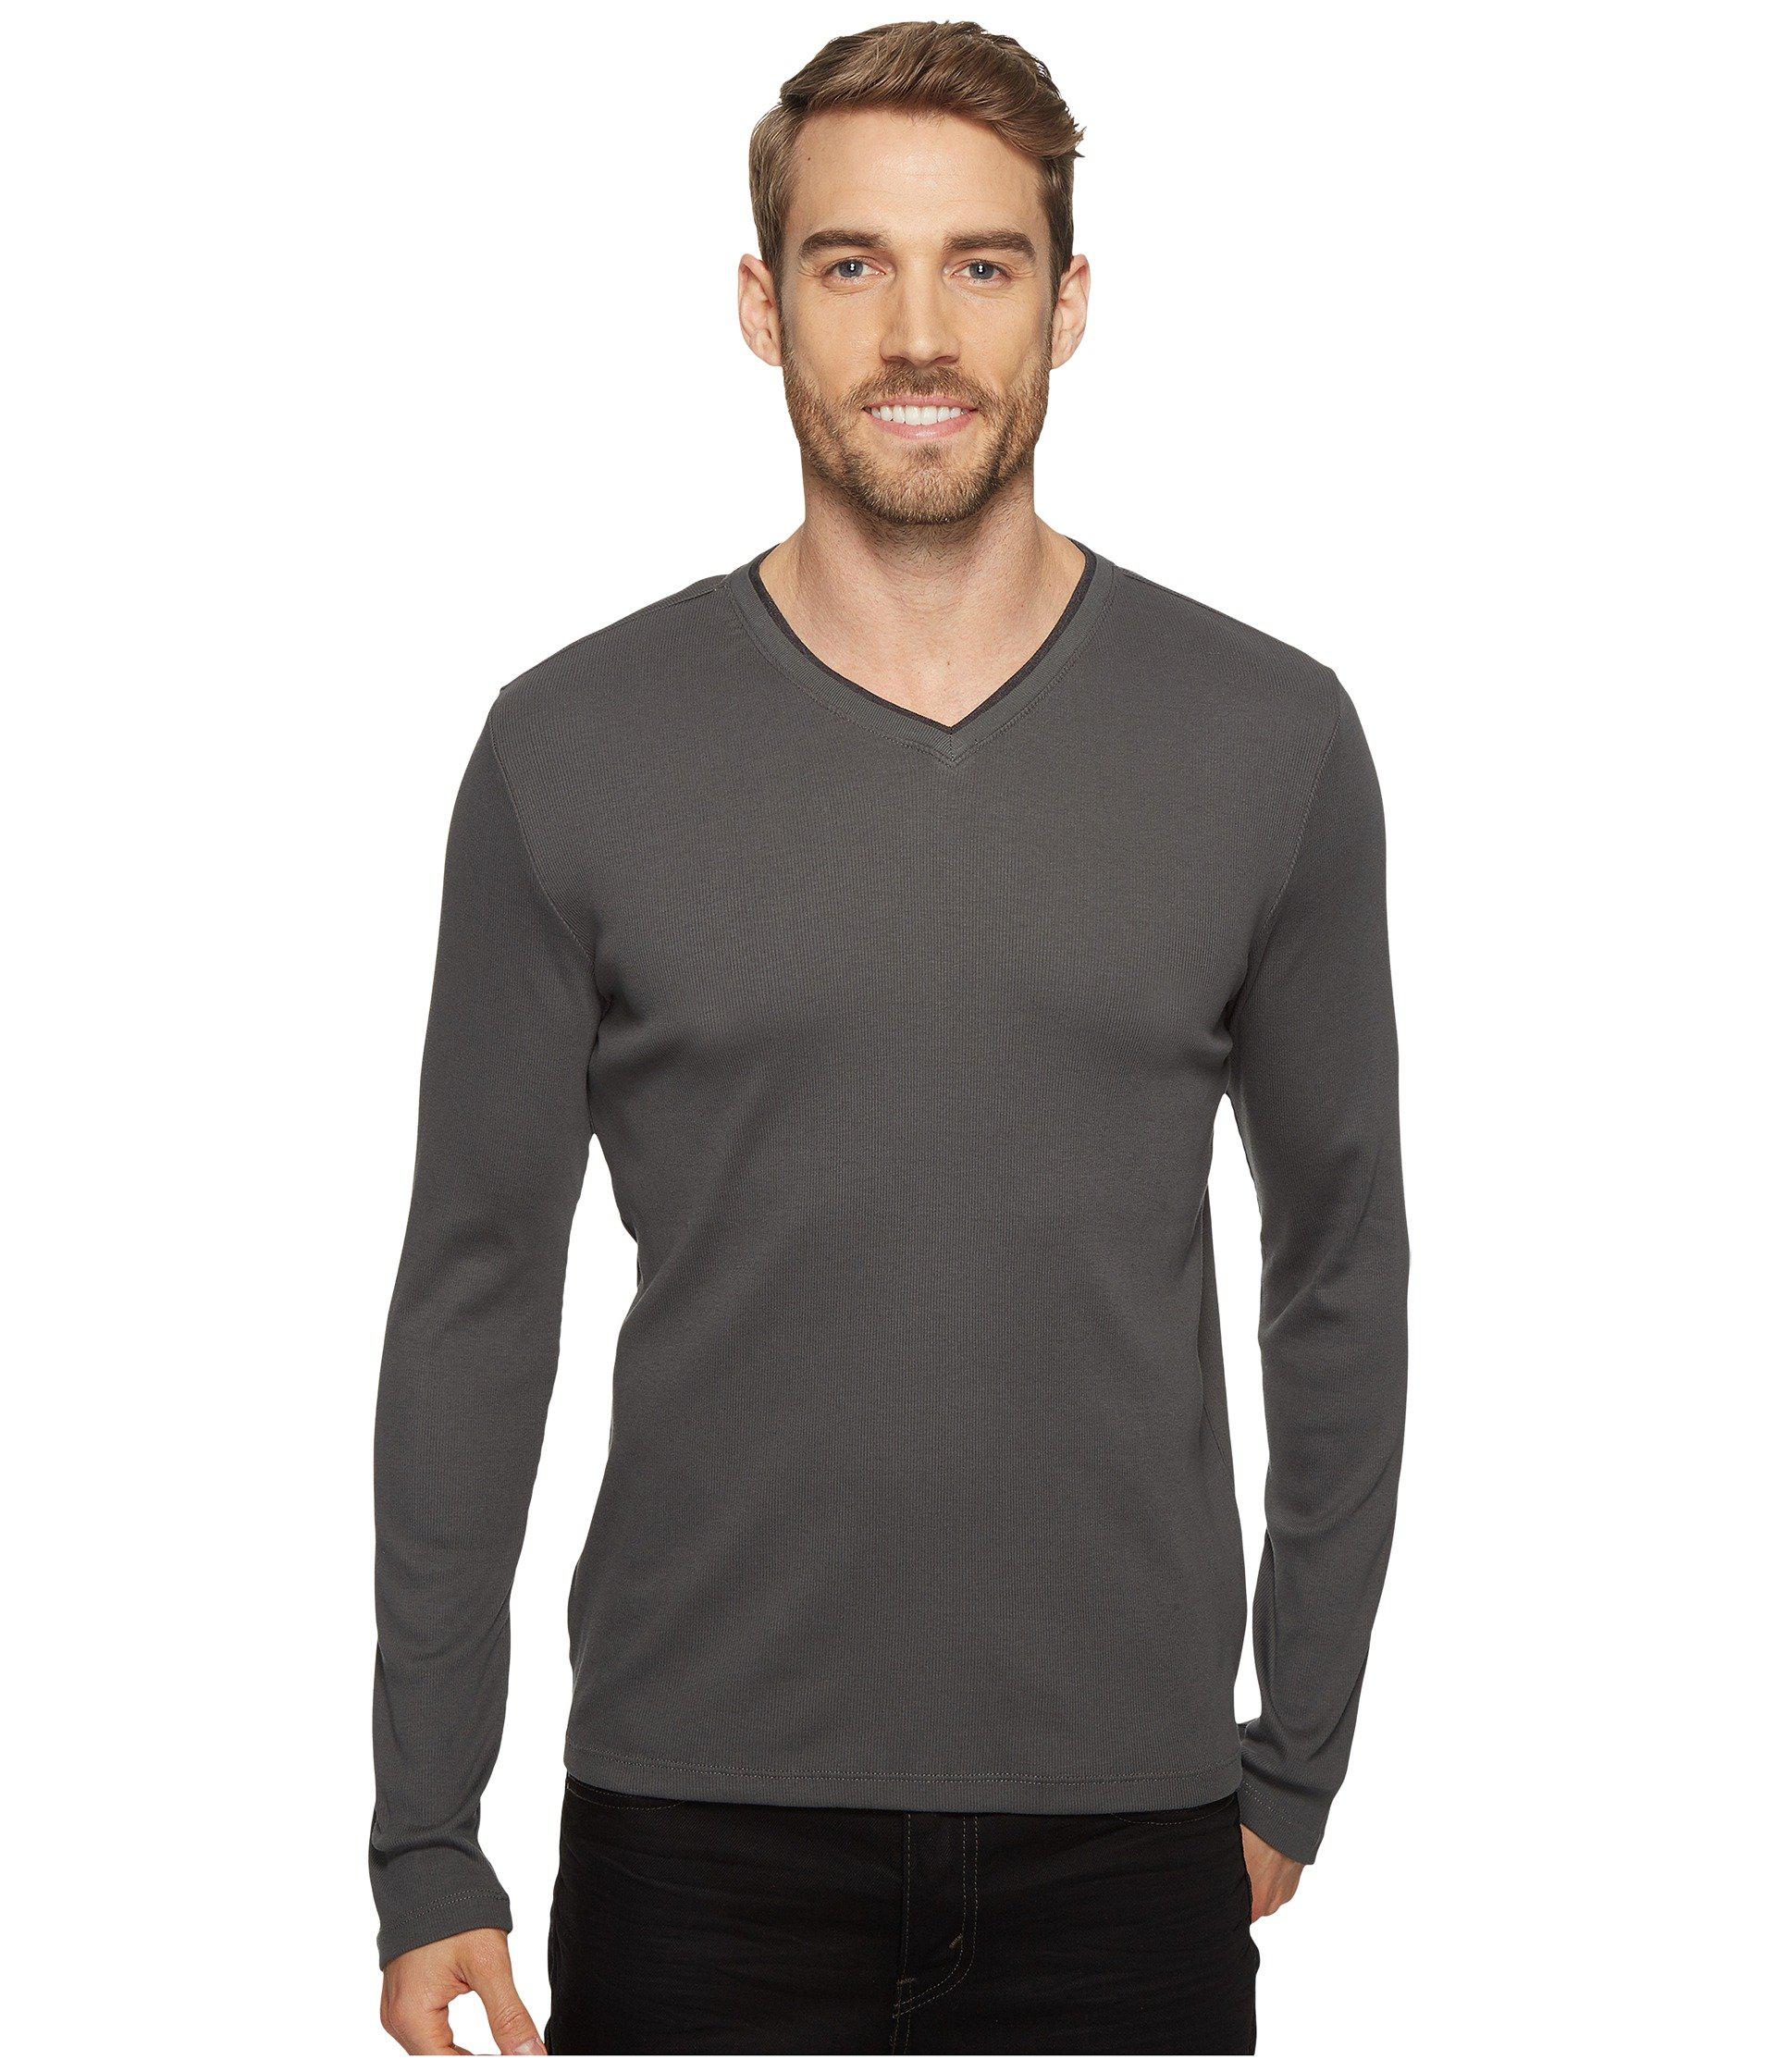 Things about Mens Long Sleeve T-Shirts